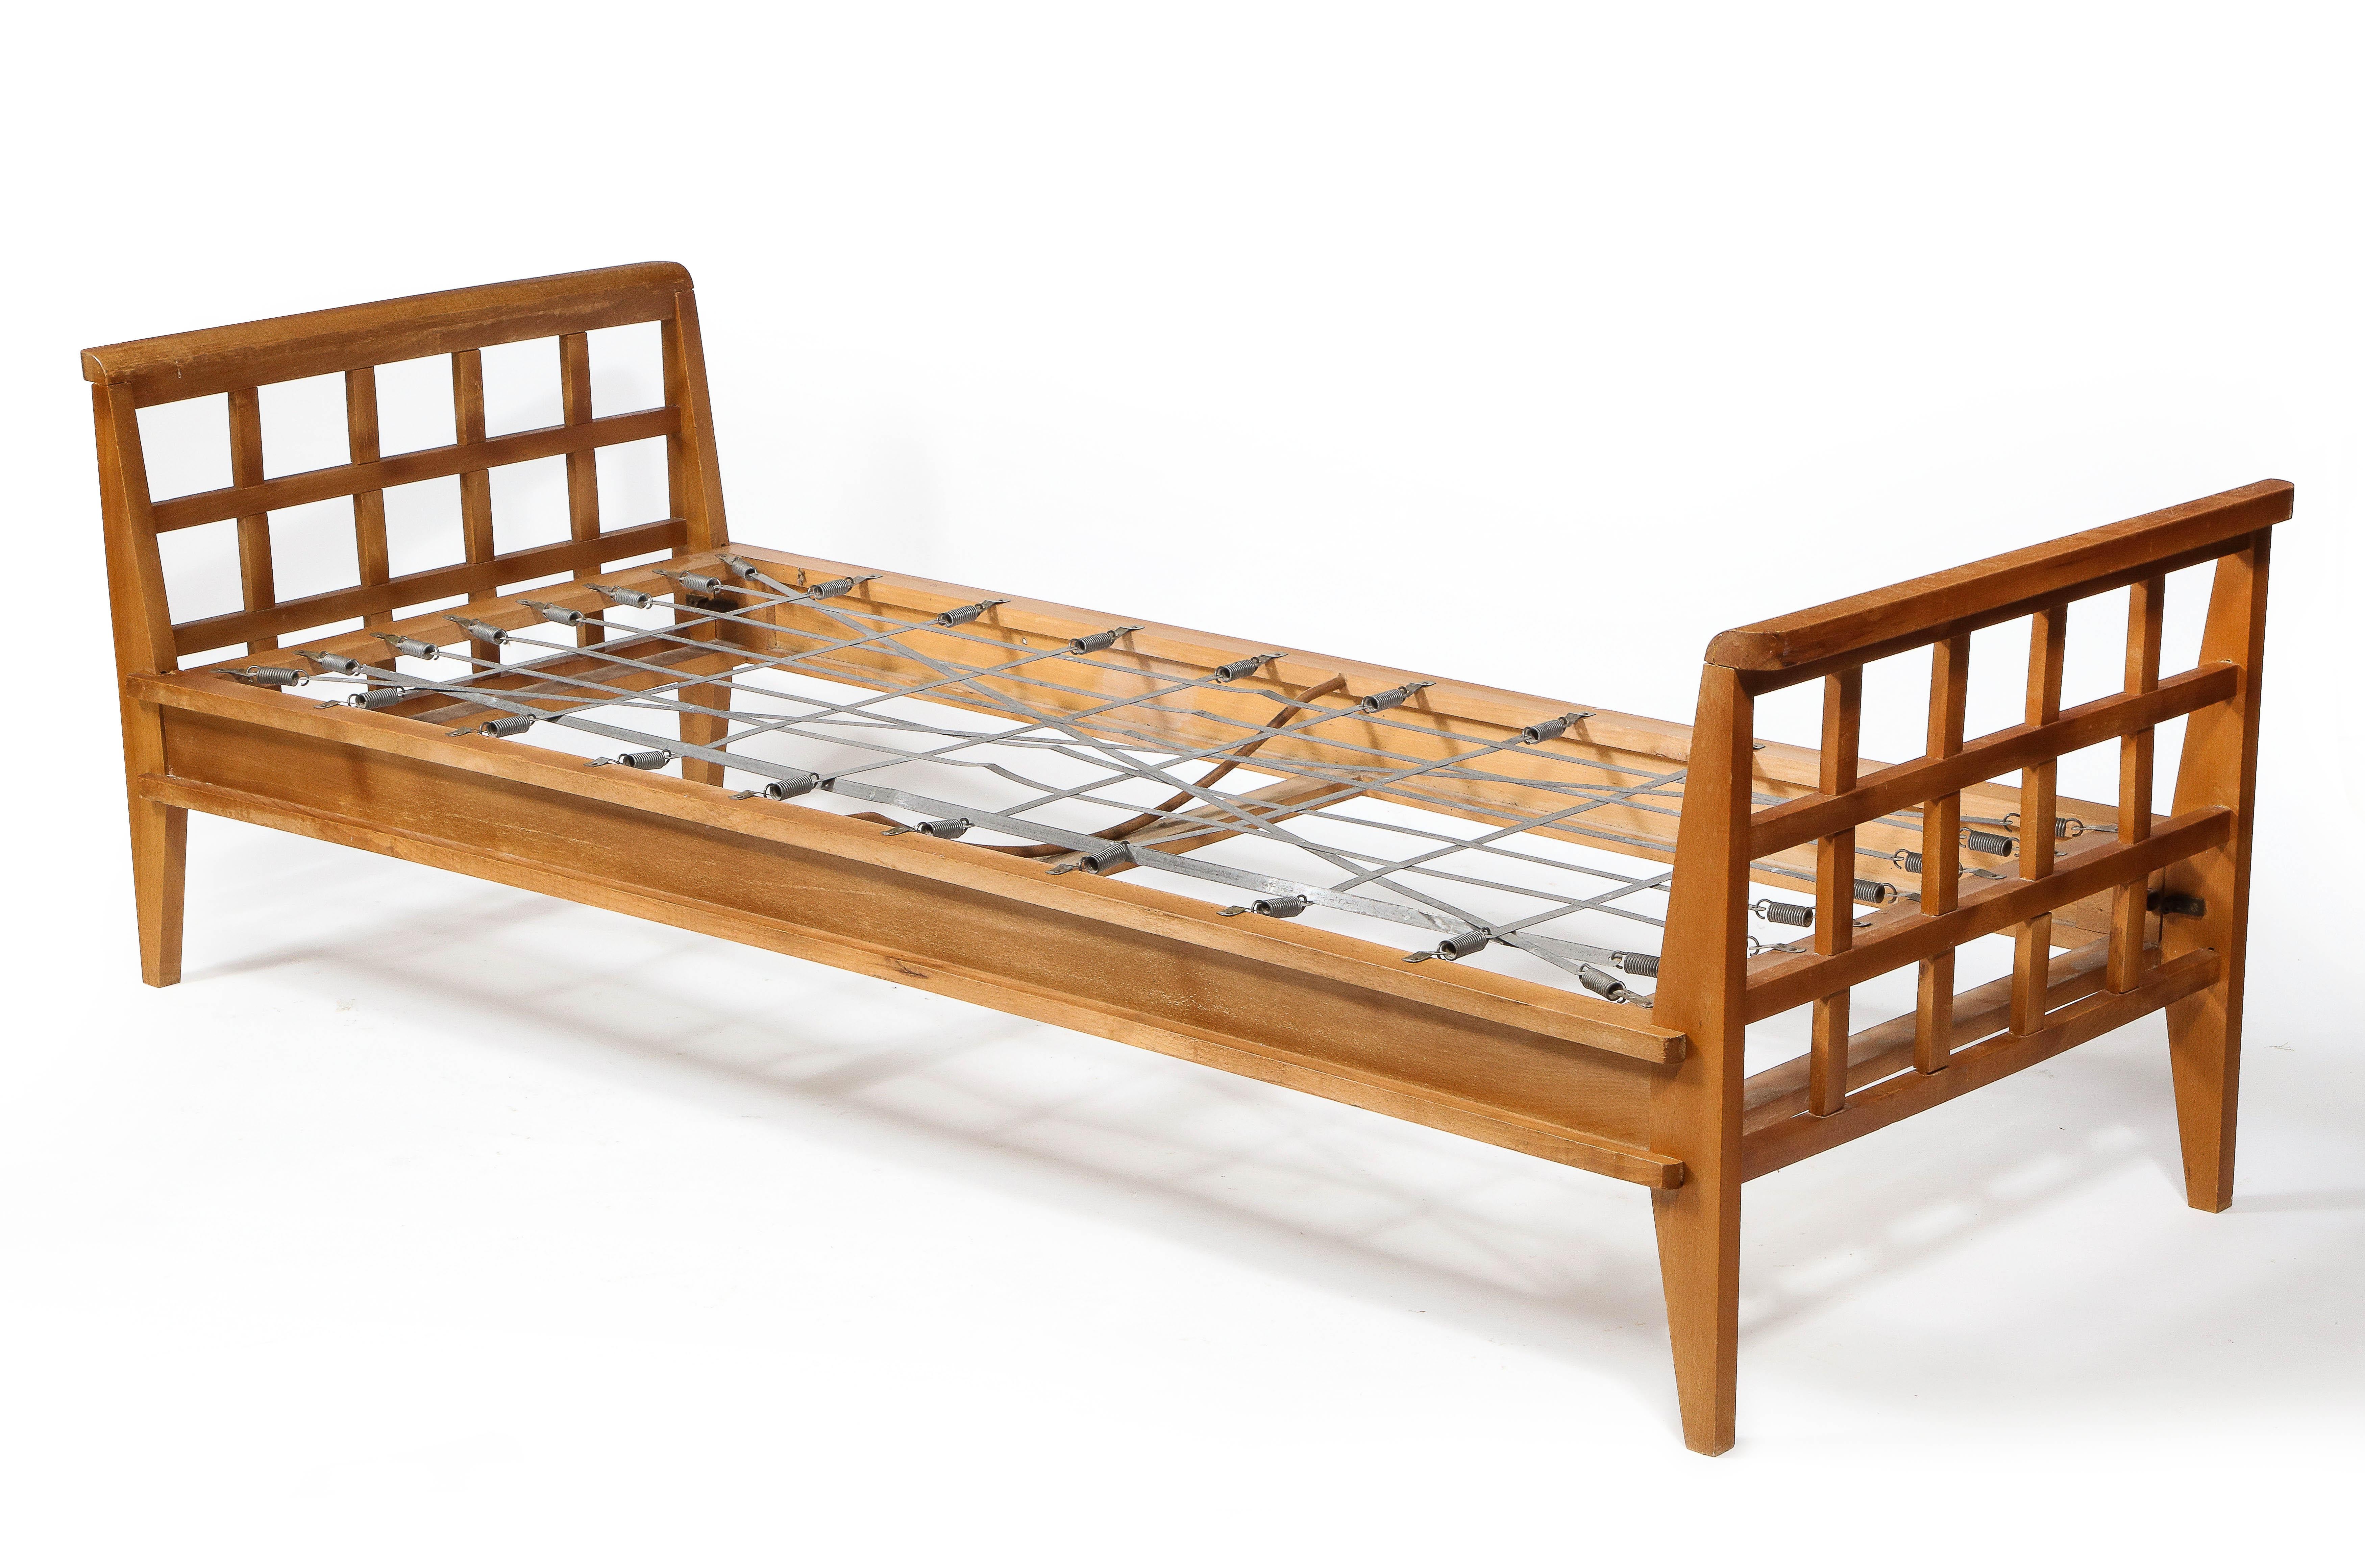 A René Gabriel daybed of the reconstruction period in the original patina, of note, Is the layered construction of the lower frame that gives the daybed a strong presence—refinishing and upholstery in COM are available.